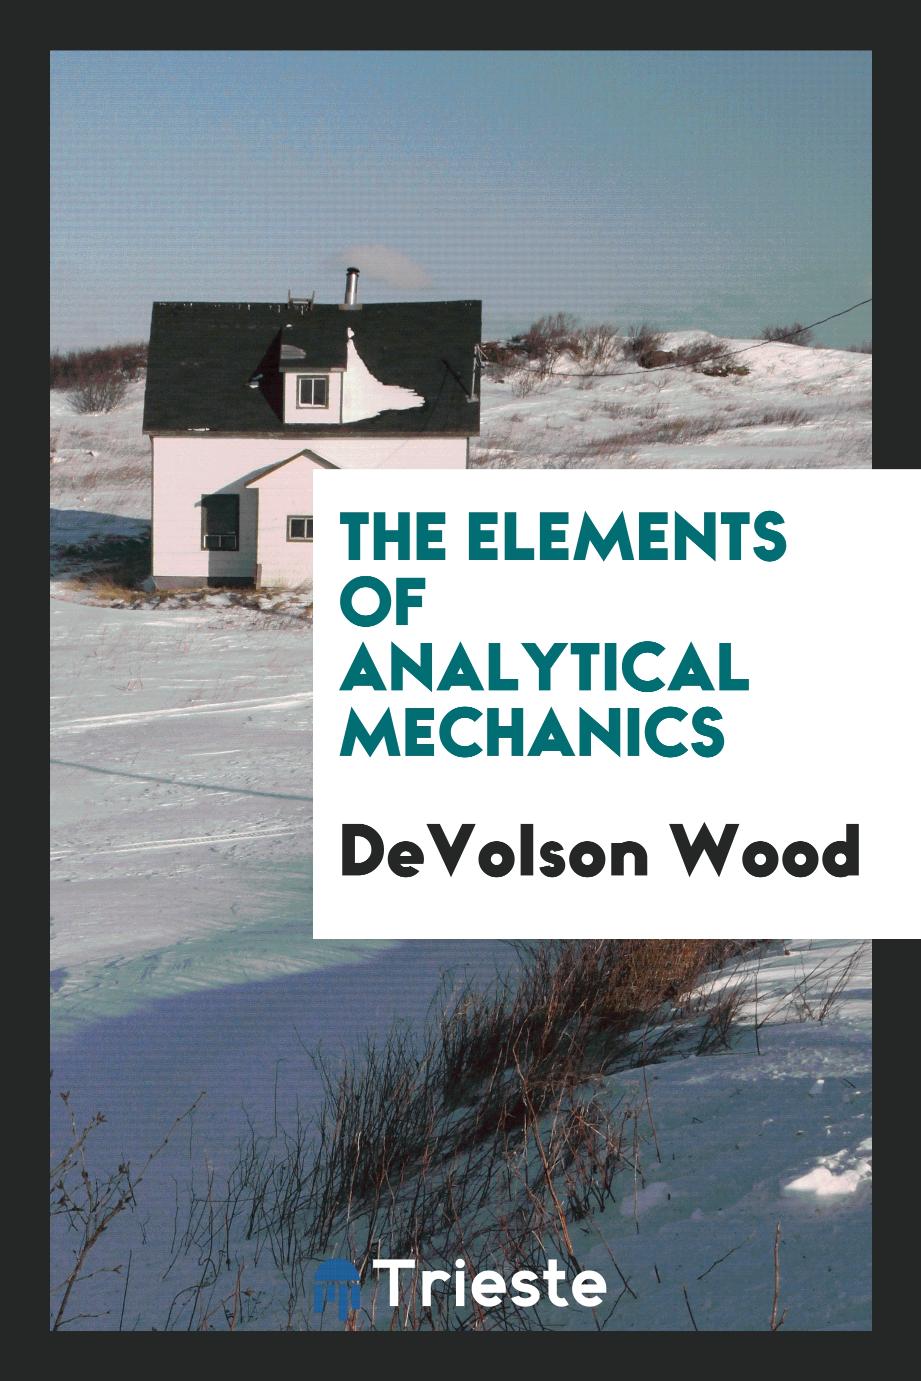 The elements of analytical mechanics